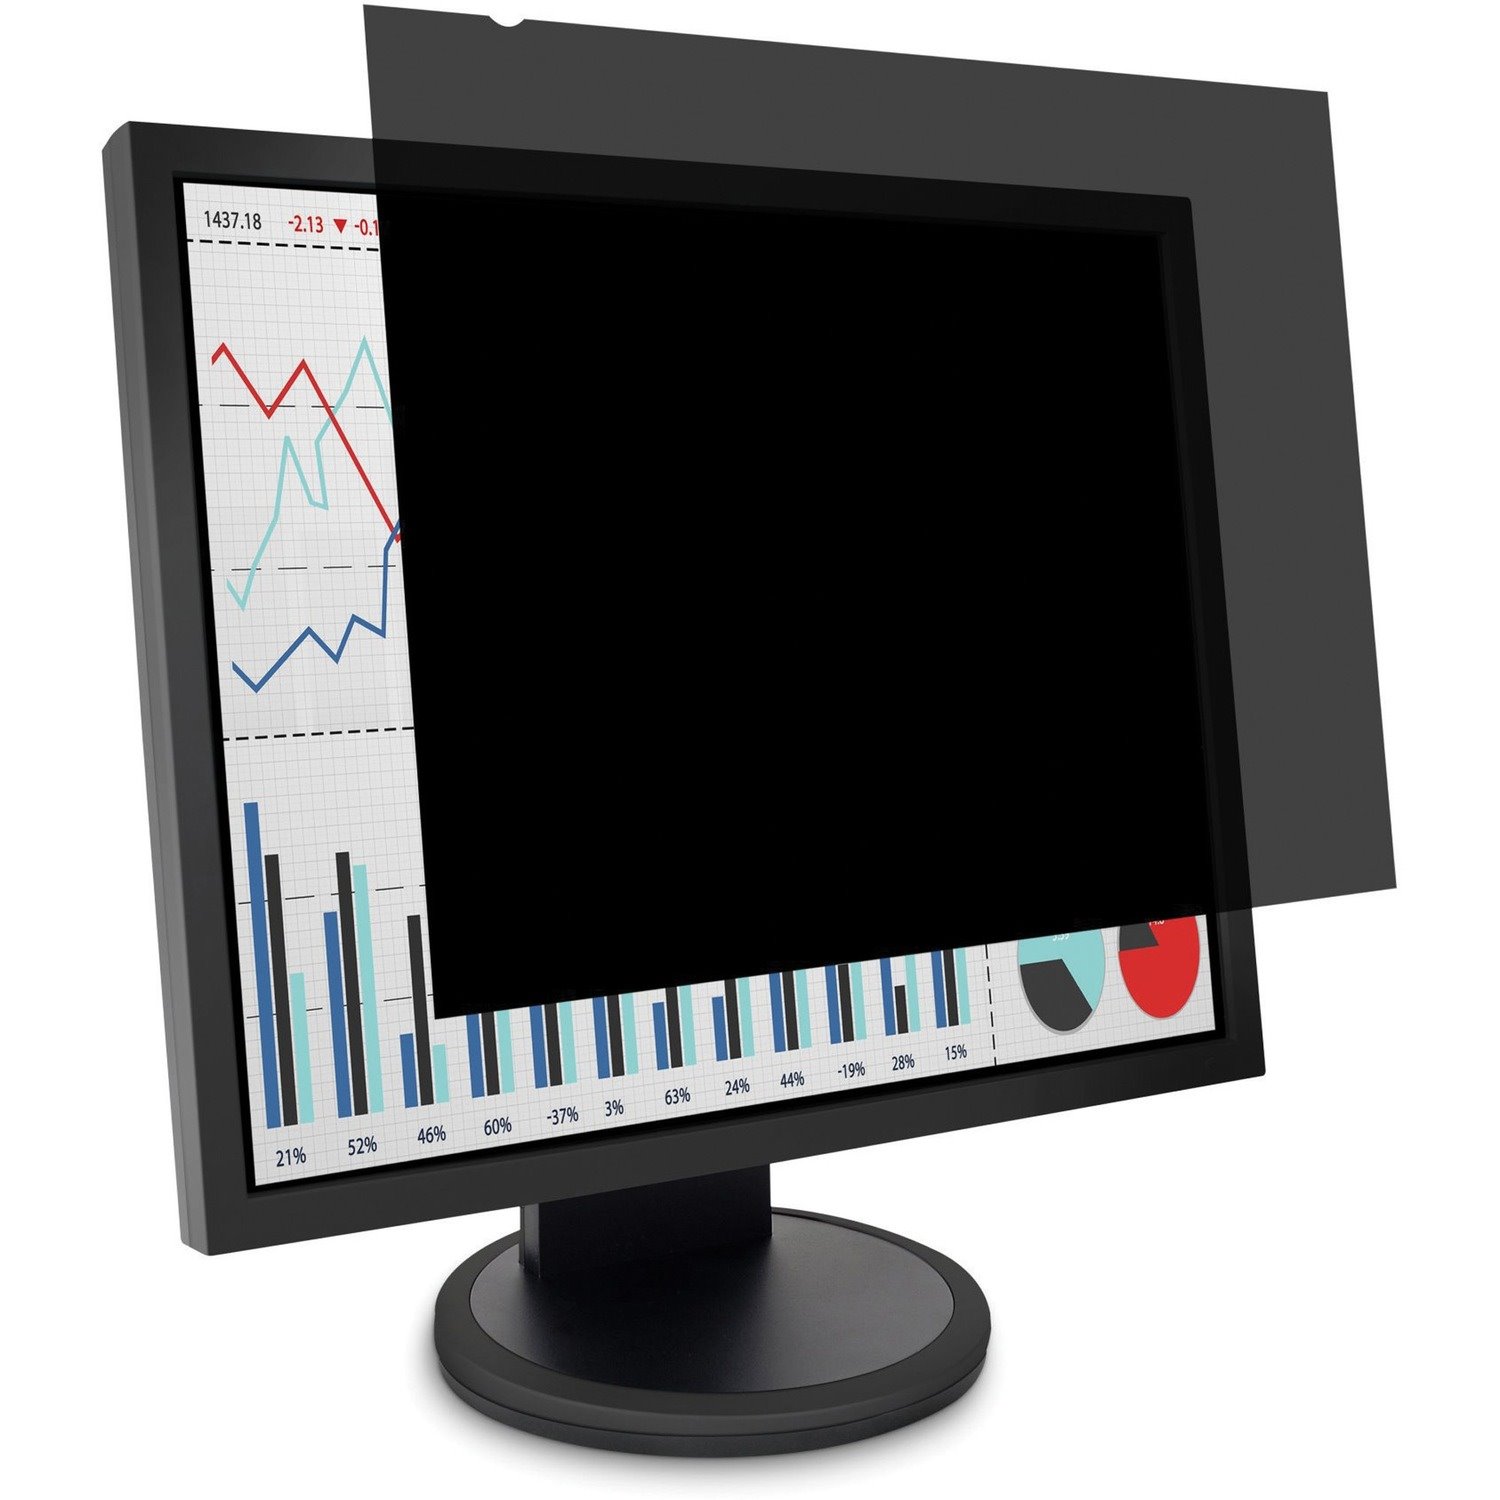 Kensington MagPro 24.0" (16:9) Monitor Privacy Screen with Magnetic Strip